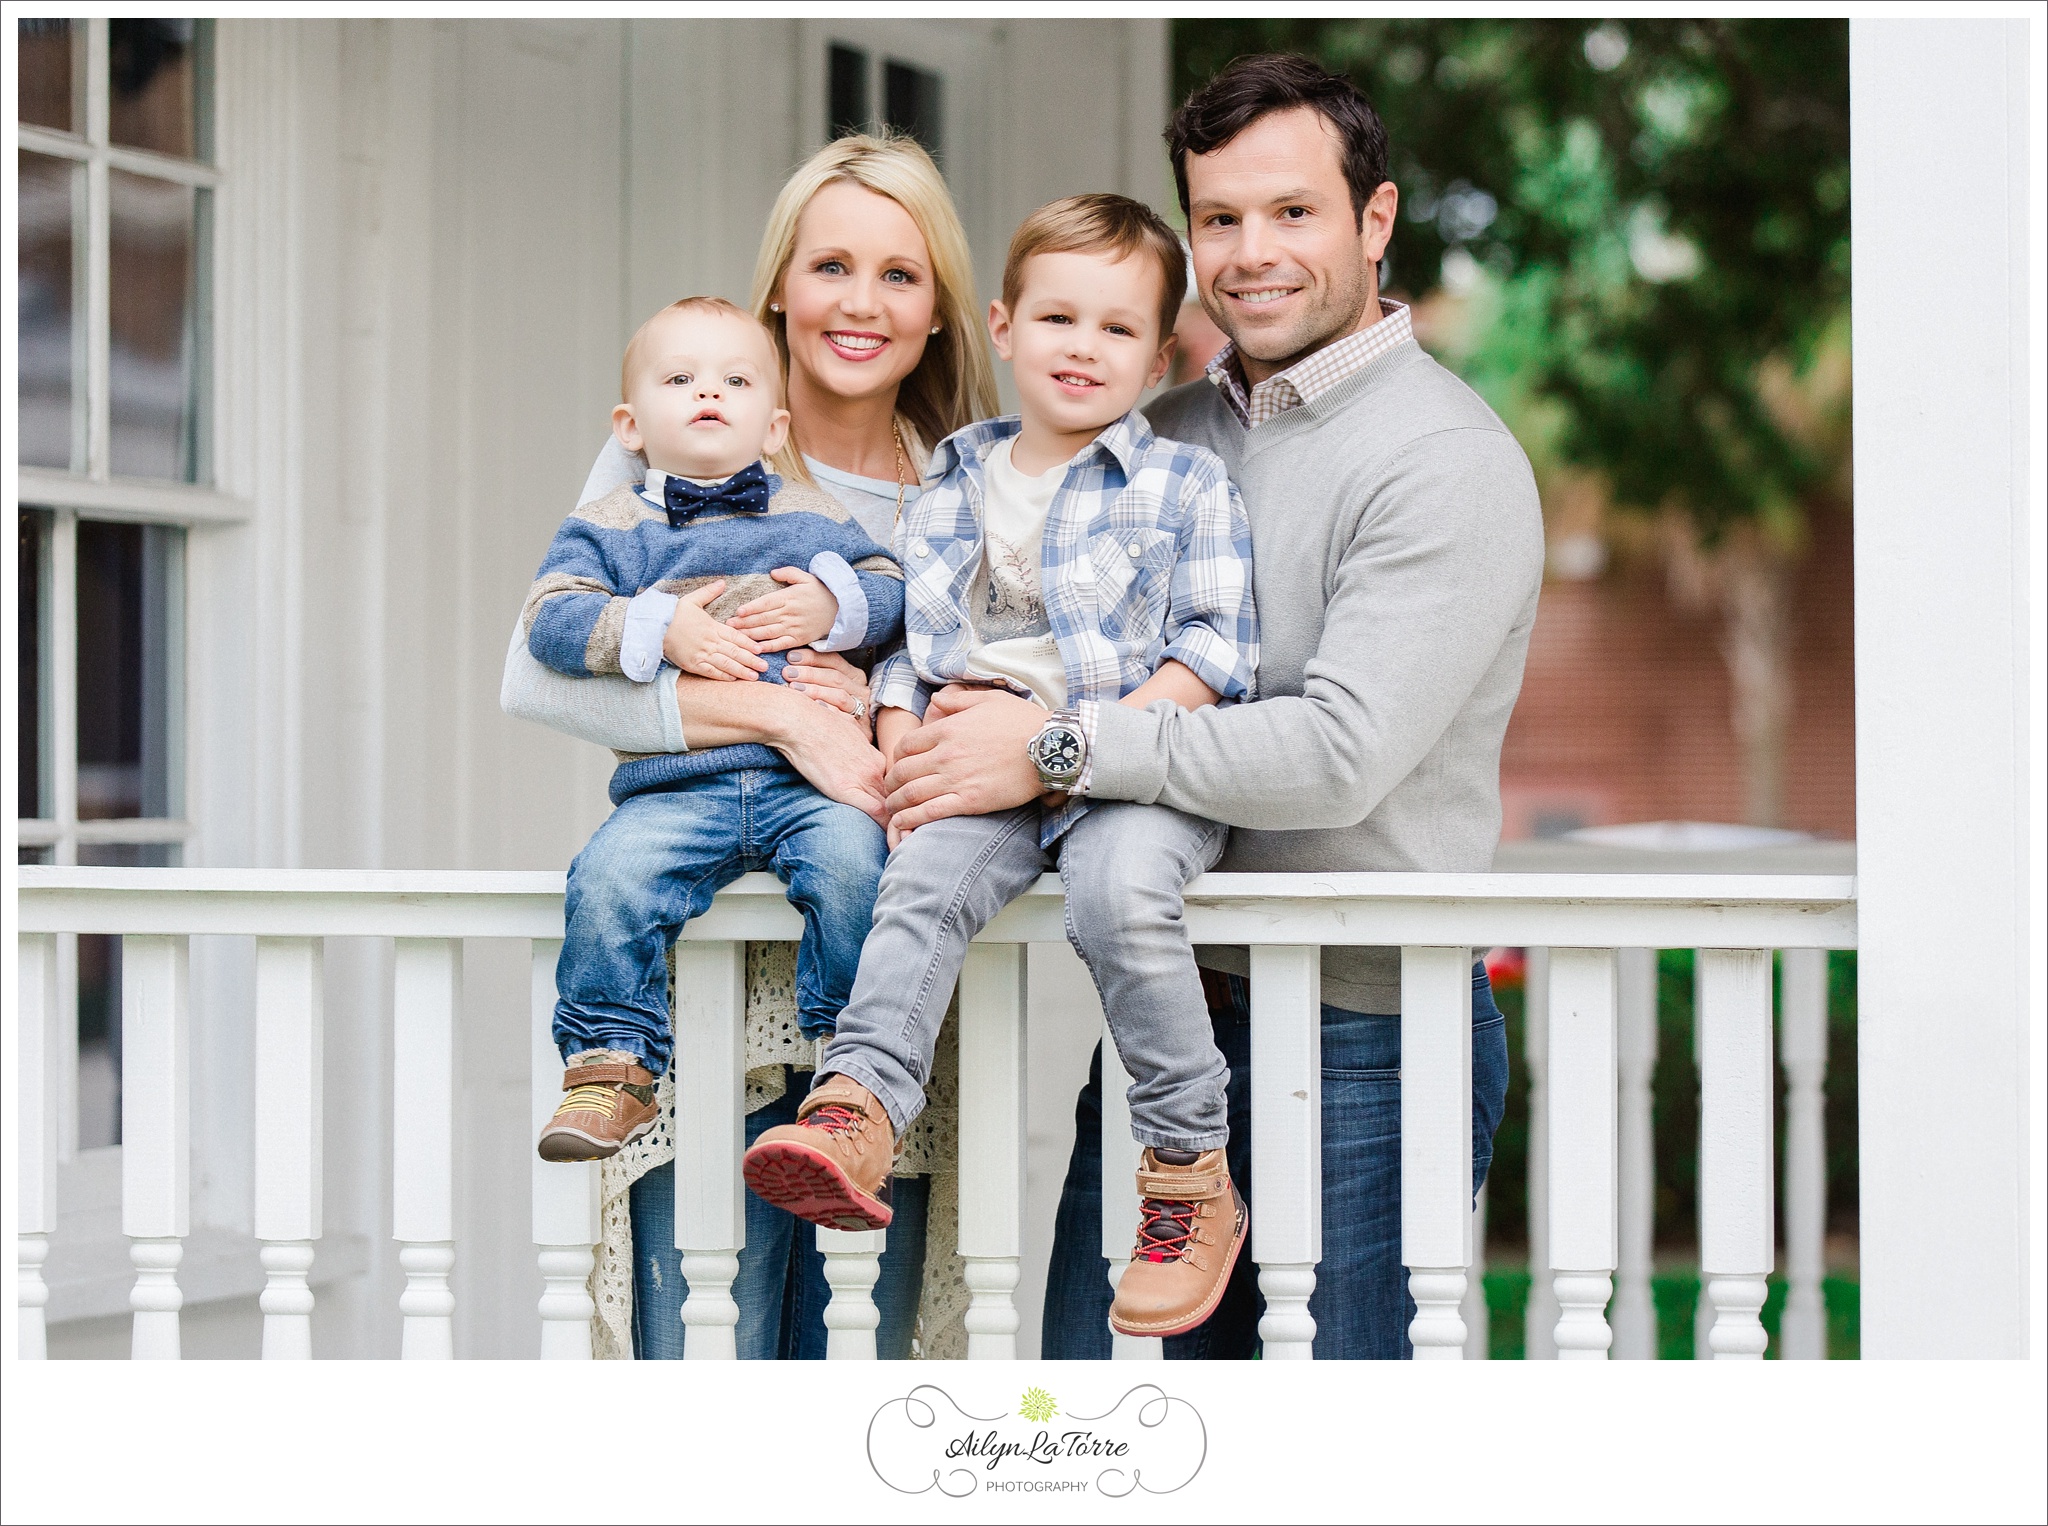 South Tampa Family Photographer | © Ailyn La Torre 2014